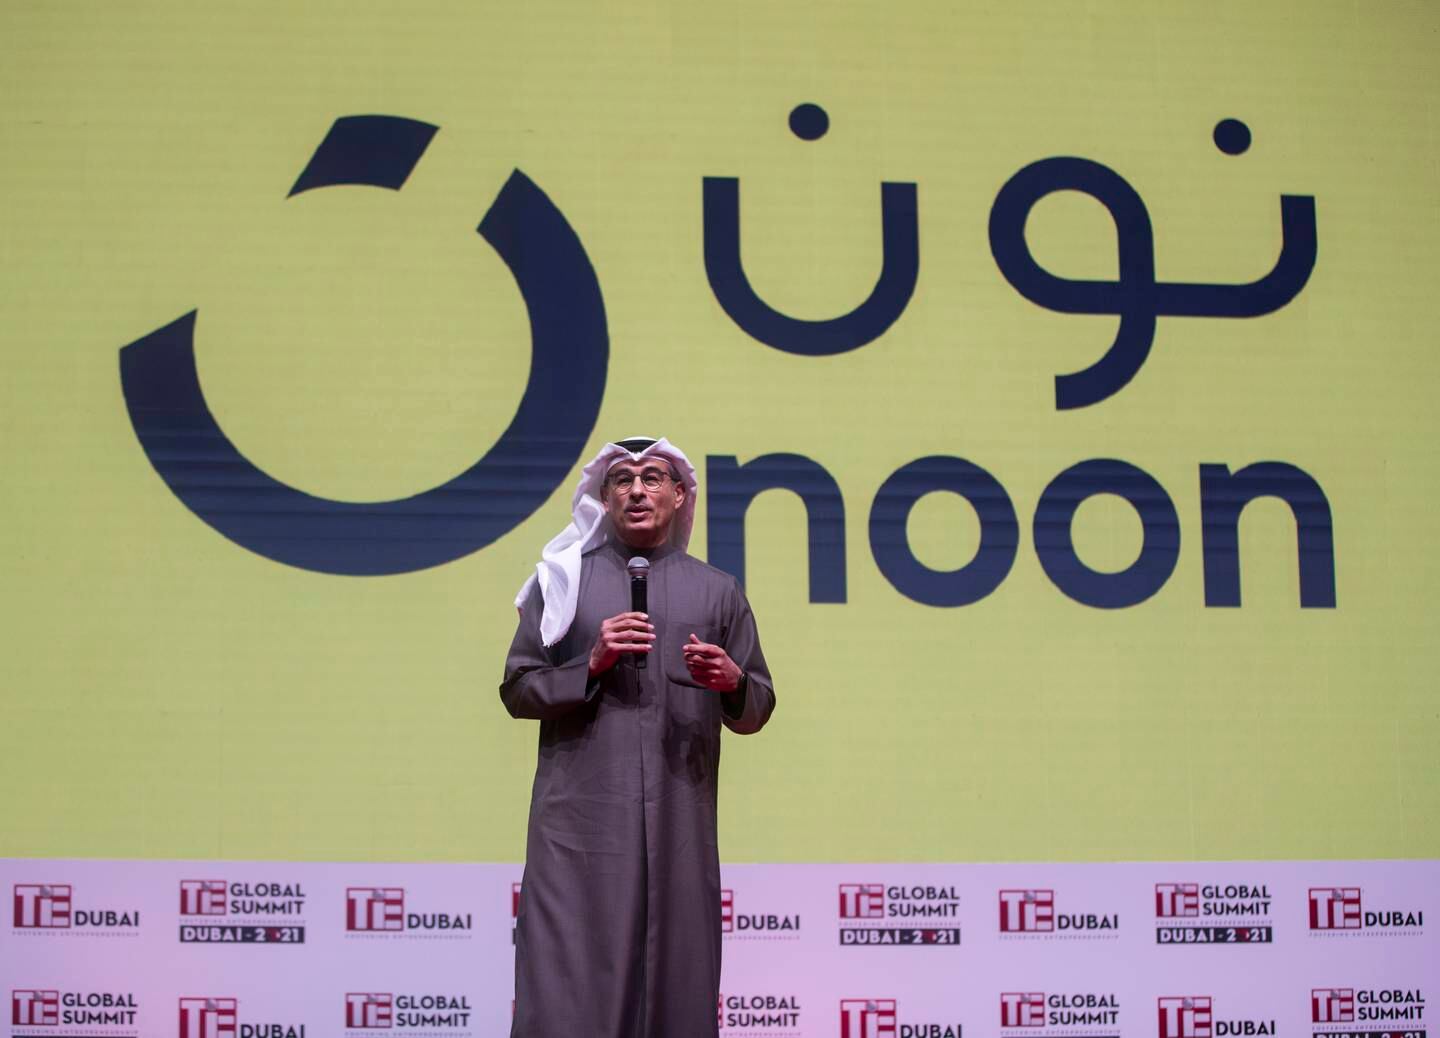 Mohammed Alabbar, founder of Emaar Properties and Noon.com, speaking during the Tie Global Summit at Expo 2020's Dubai Exhibition Centre on Wednesday. Leslie Pableo / The National